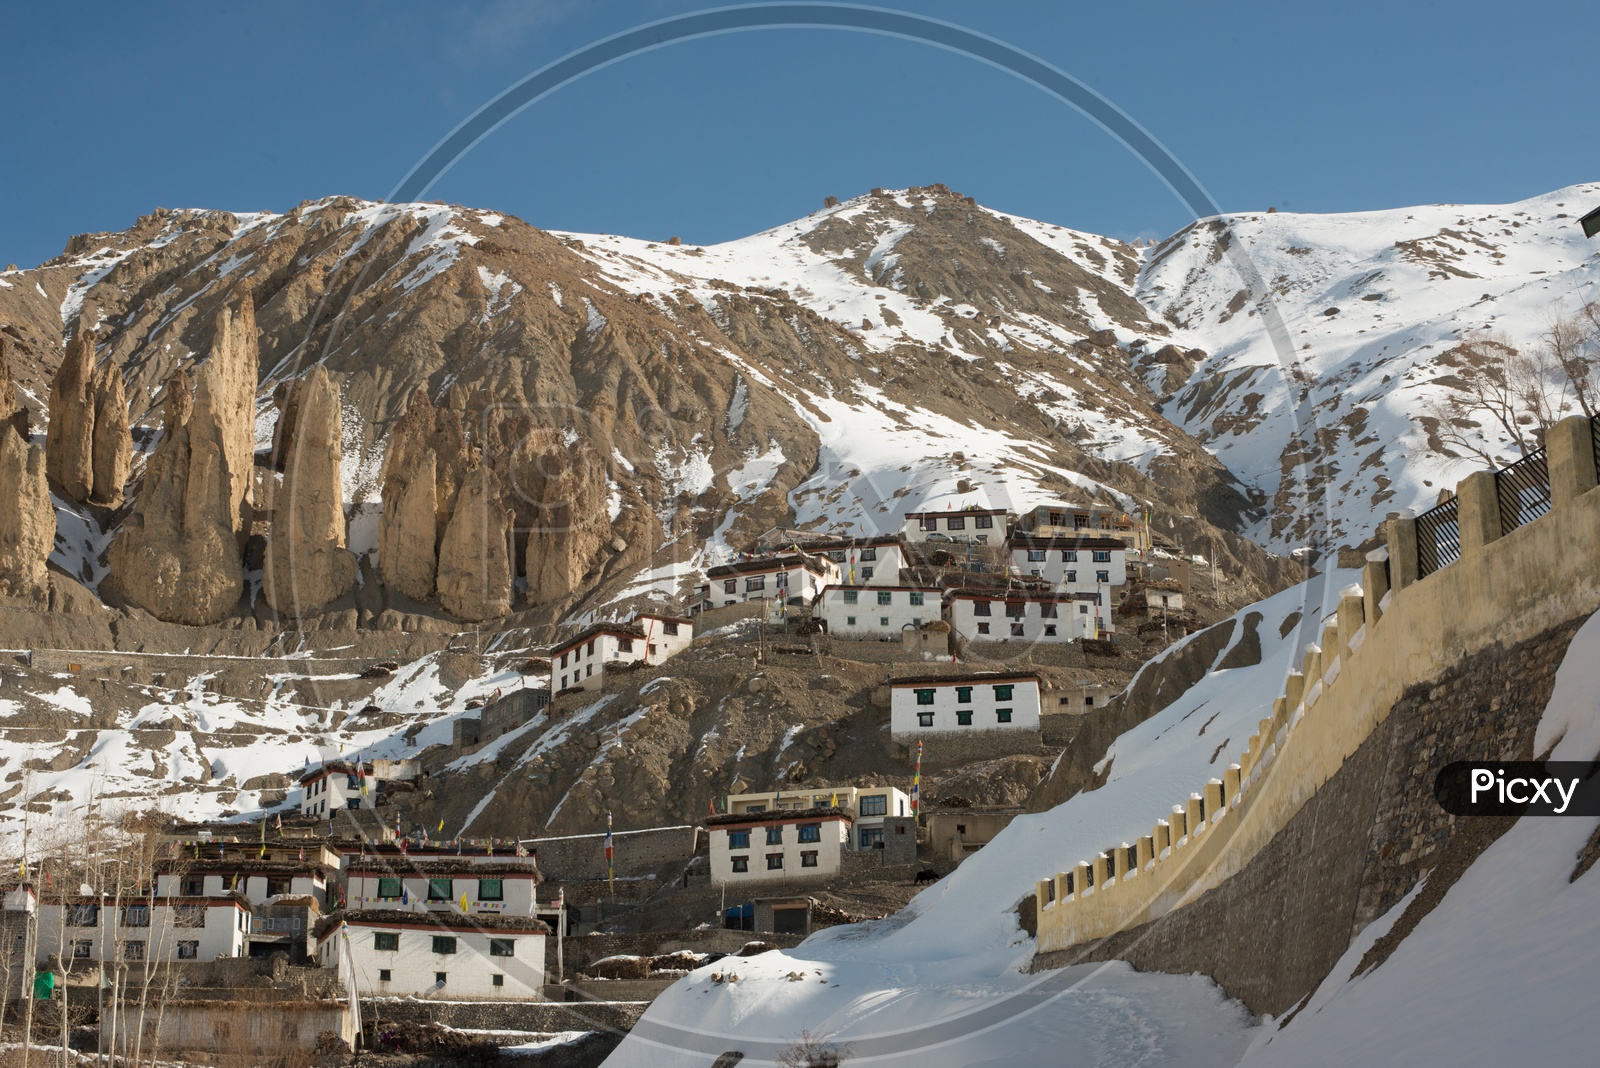 A Village in Spiti on Mountain Surrounded by Snowy Himalayan Mountains